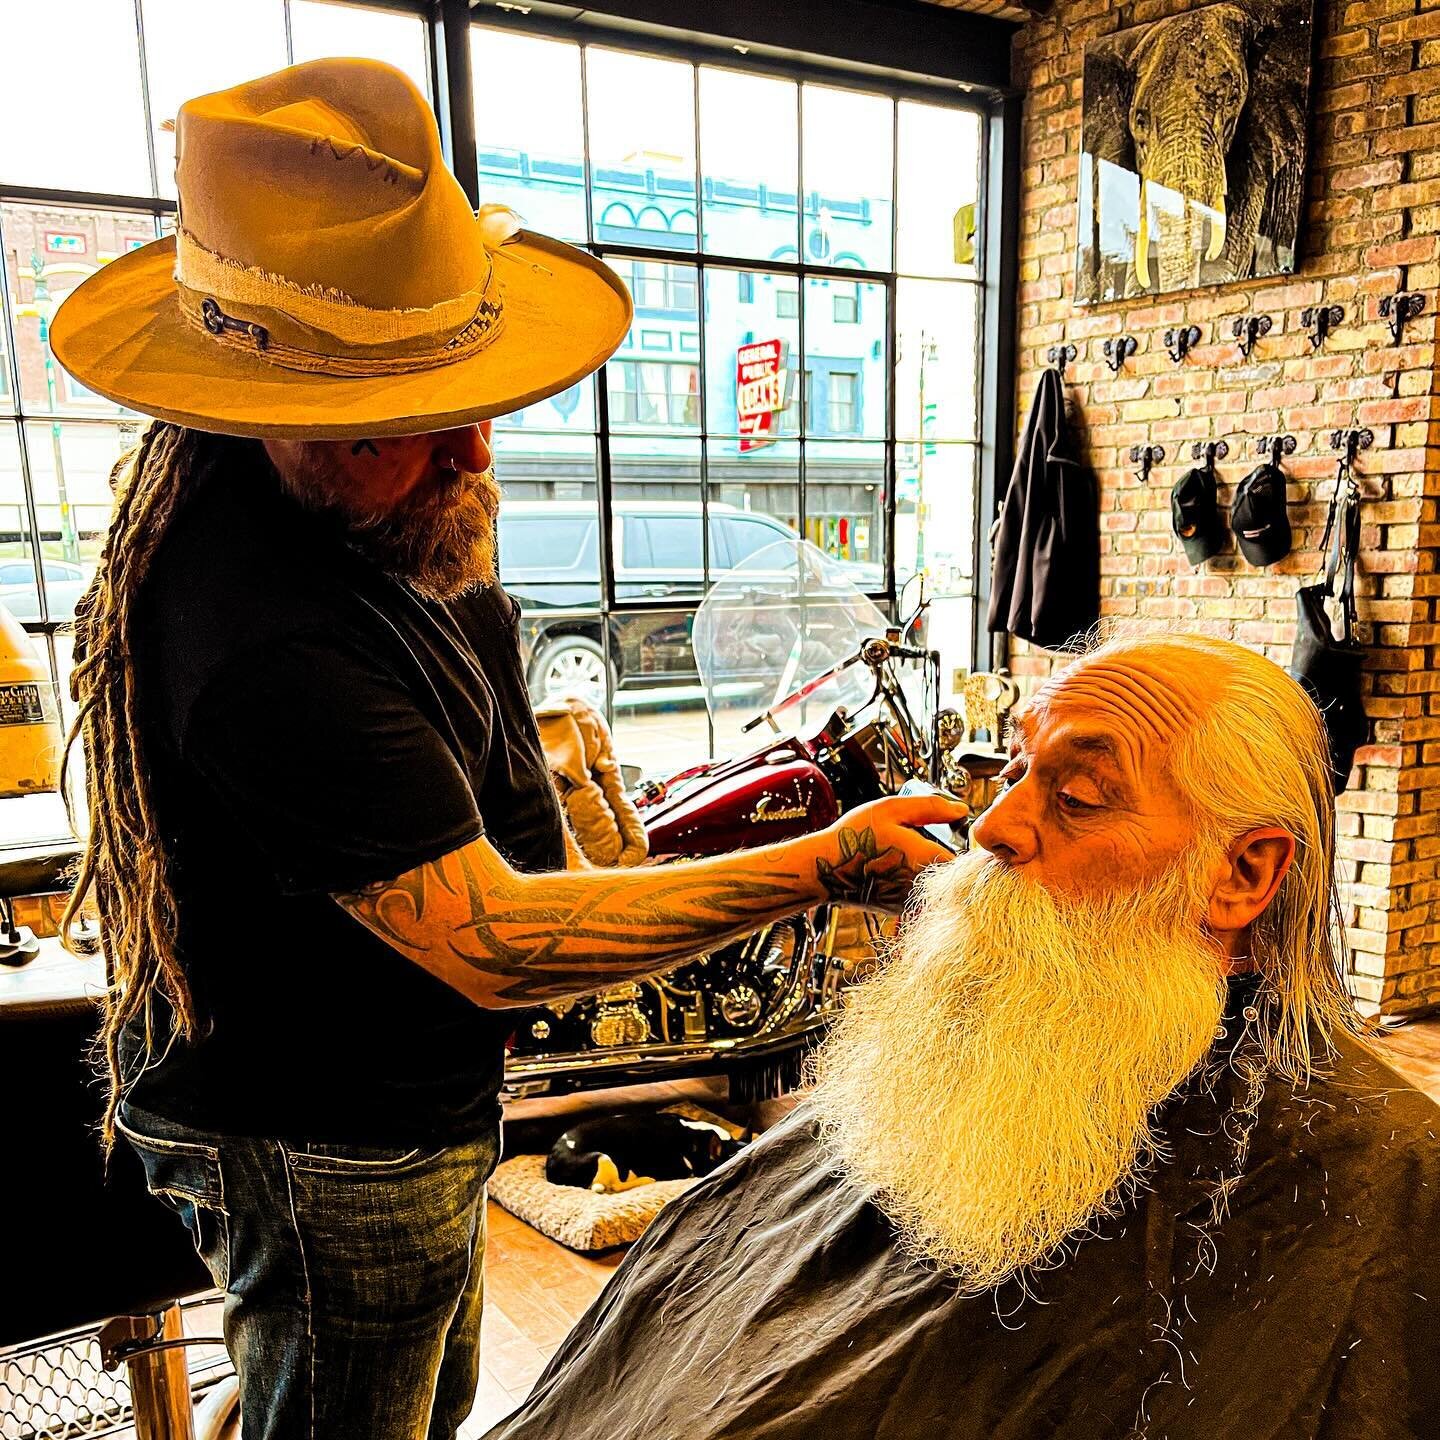 Even Santa Claus knows who&rsquo;s the best in town&hellip; get your Christmas appointments now while they last #herecomessantaclaus #beardstyle #bestofdetroit